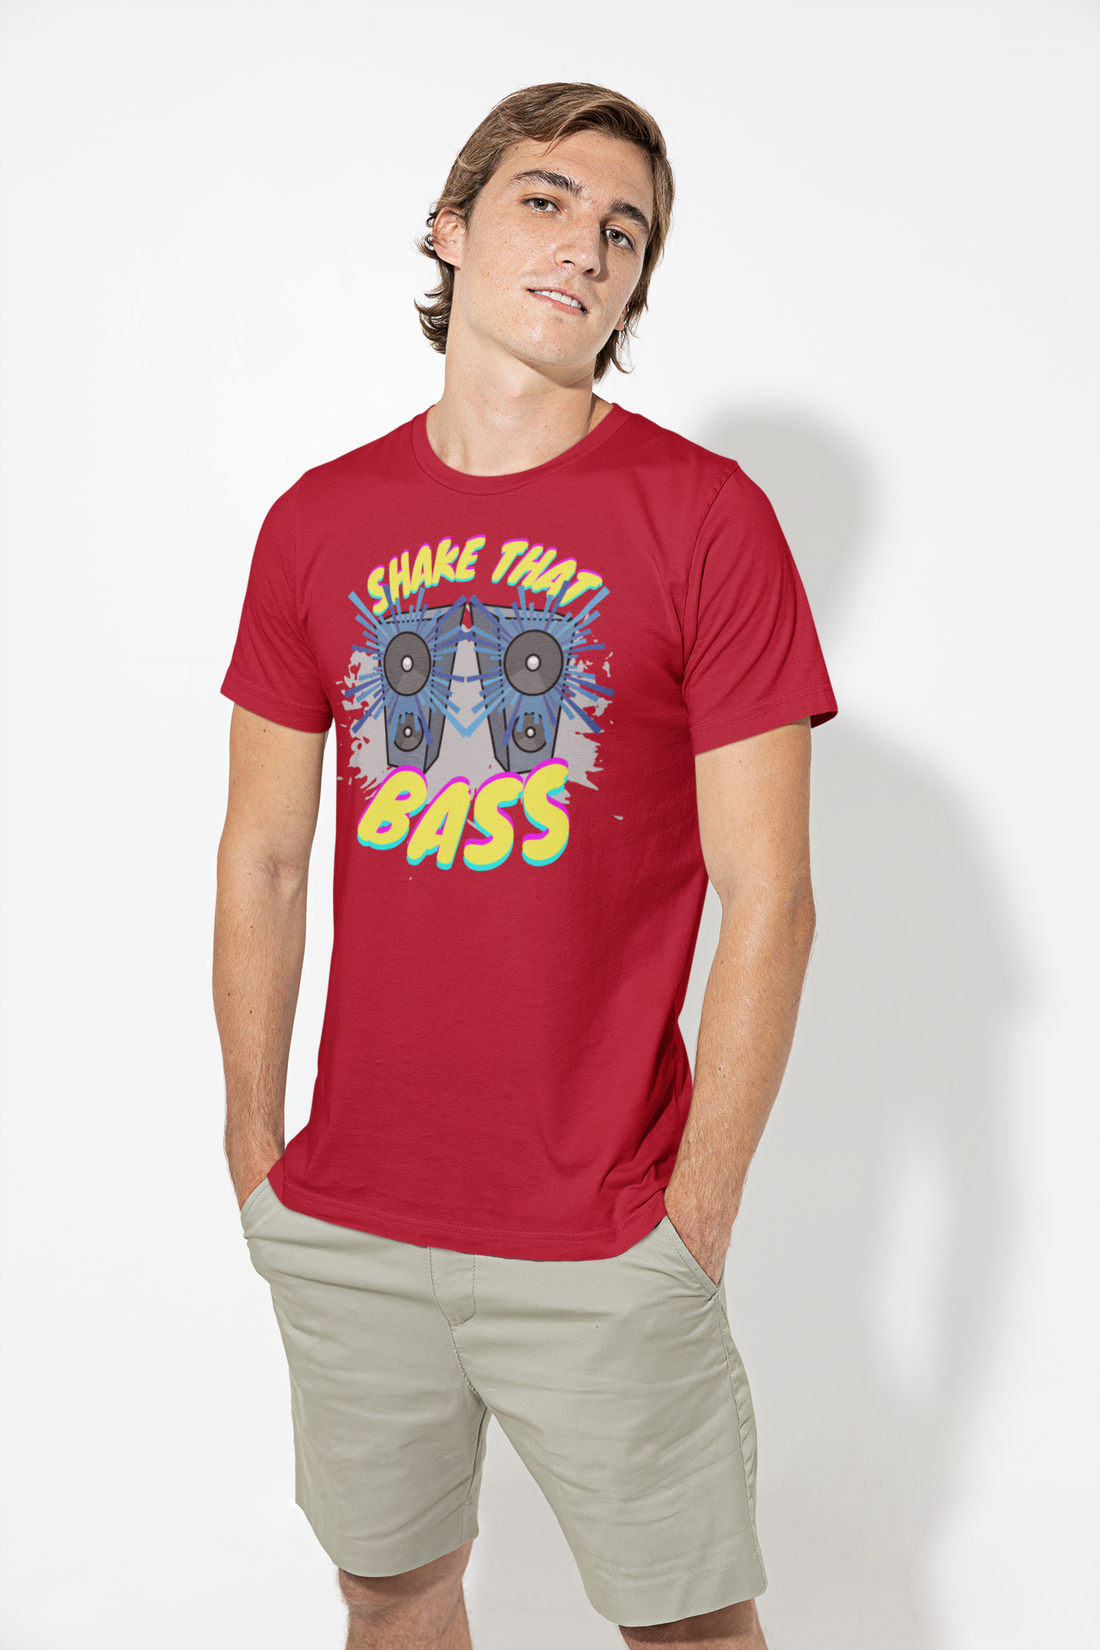 A music tshirt for bassheads and bass lovers. It has the text "shake that bass" and graphics of two really loud speakers